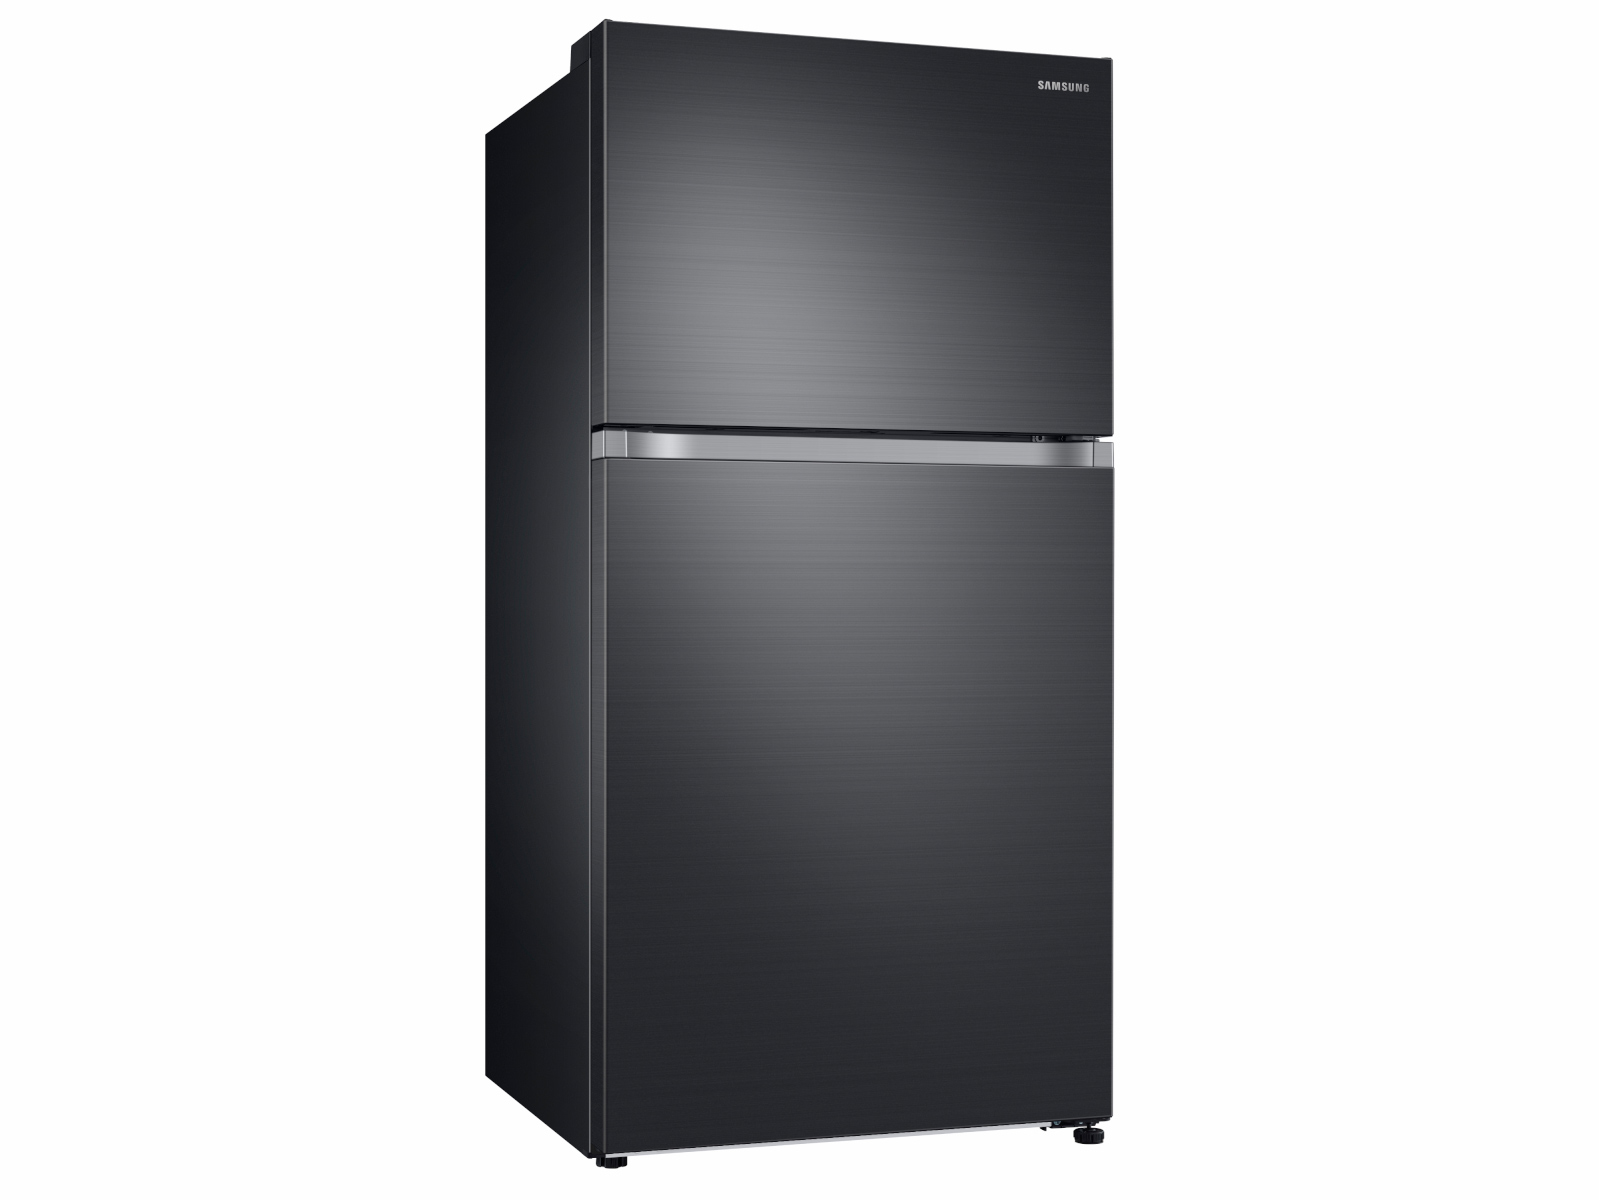 21 cu. ft. Top Freezer Refrigerator with FlexZone™ in Stainless Steel  Refrigerator - RT21M6213SR/AA